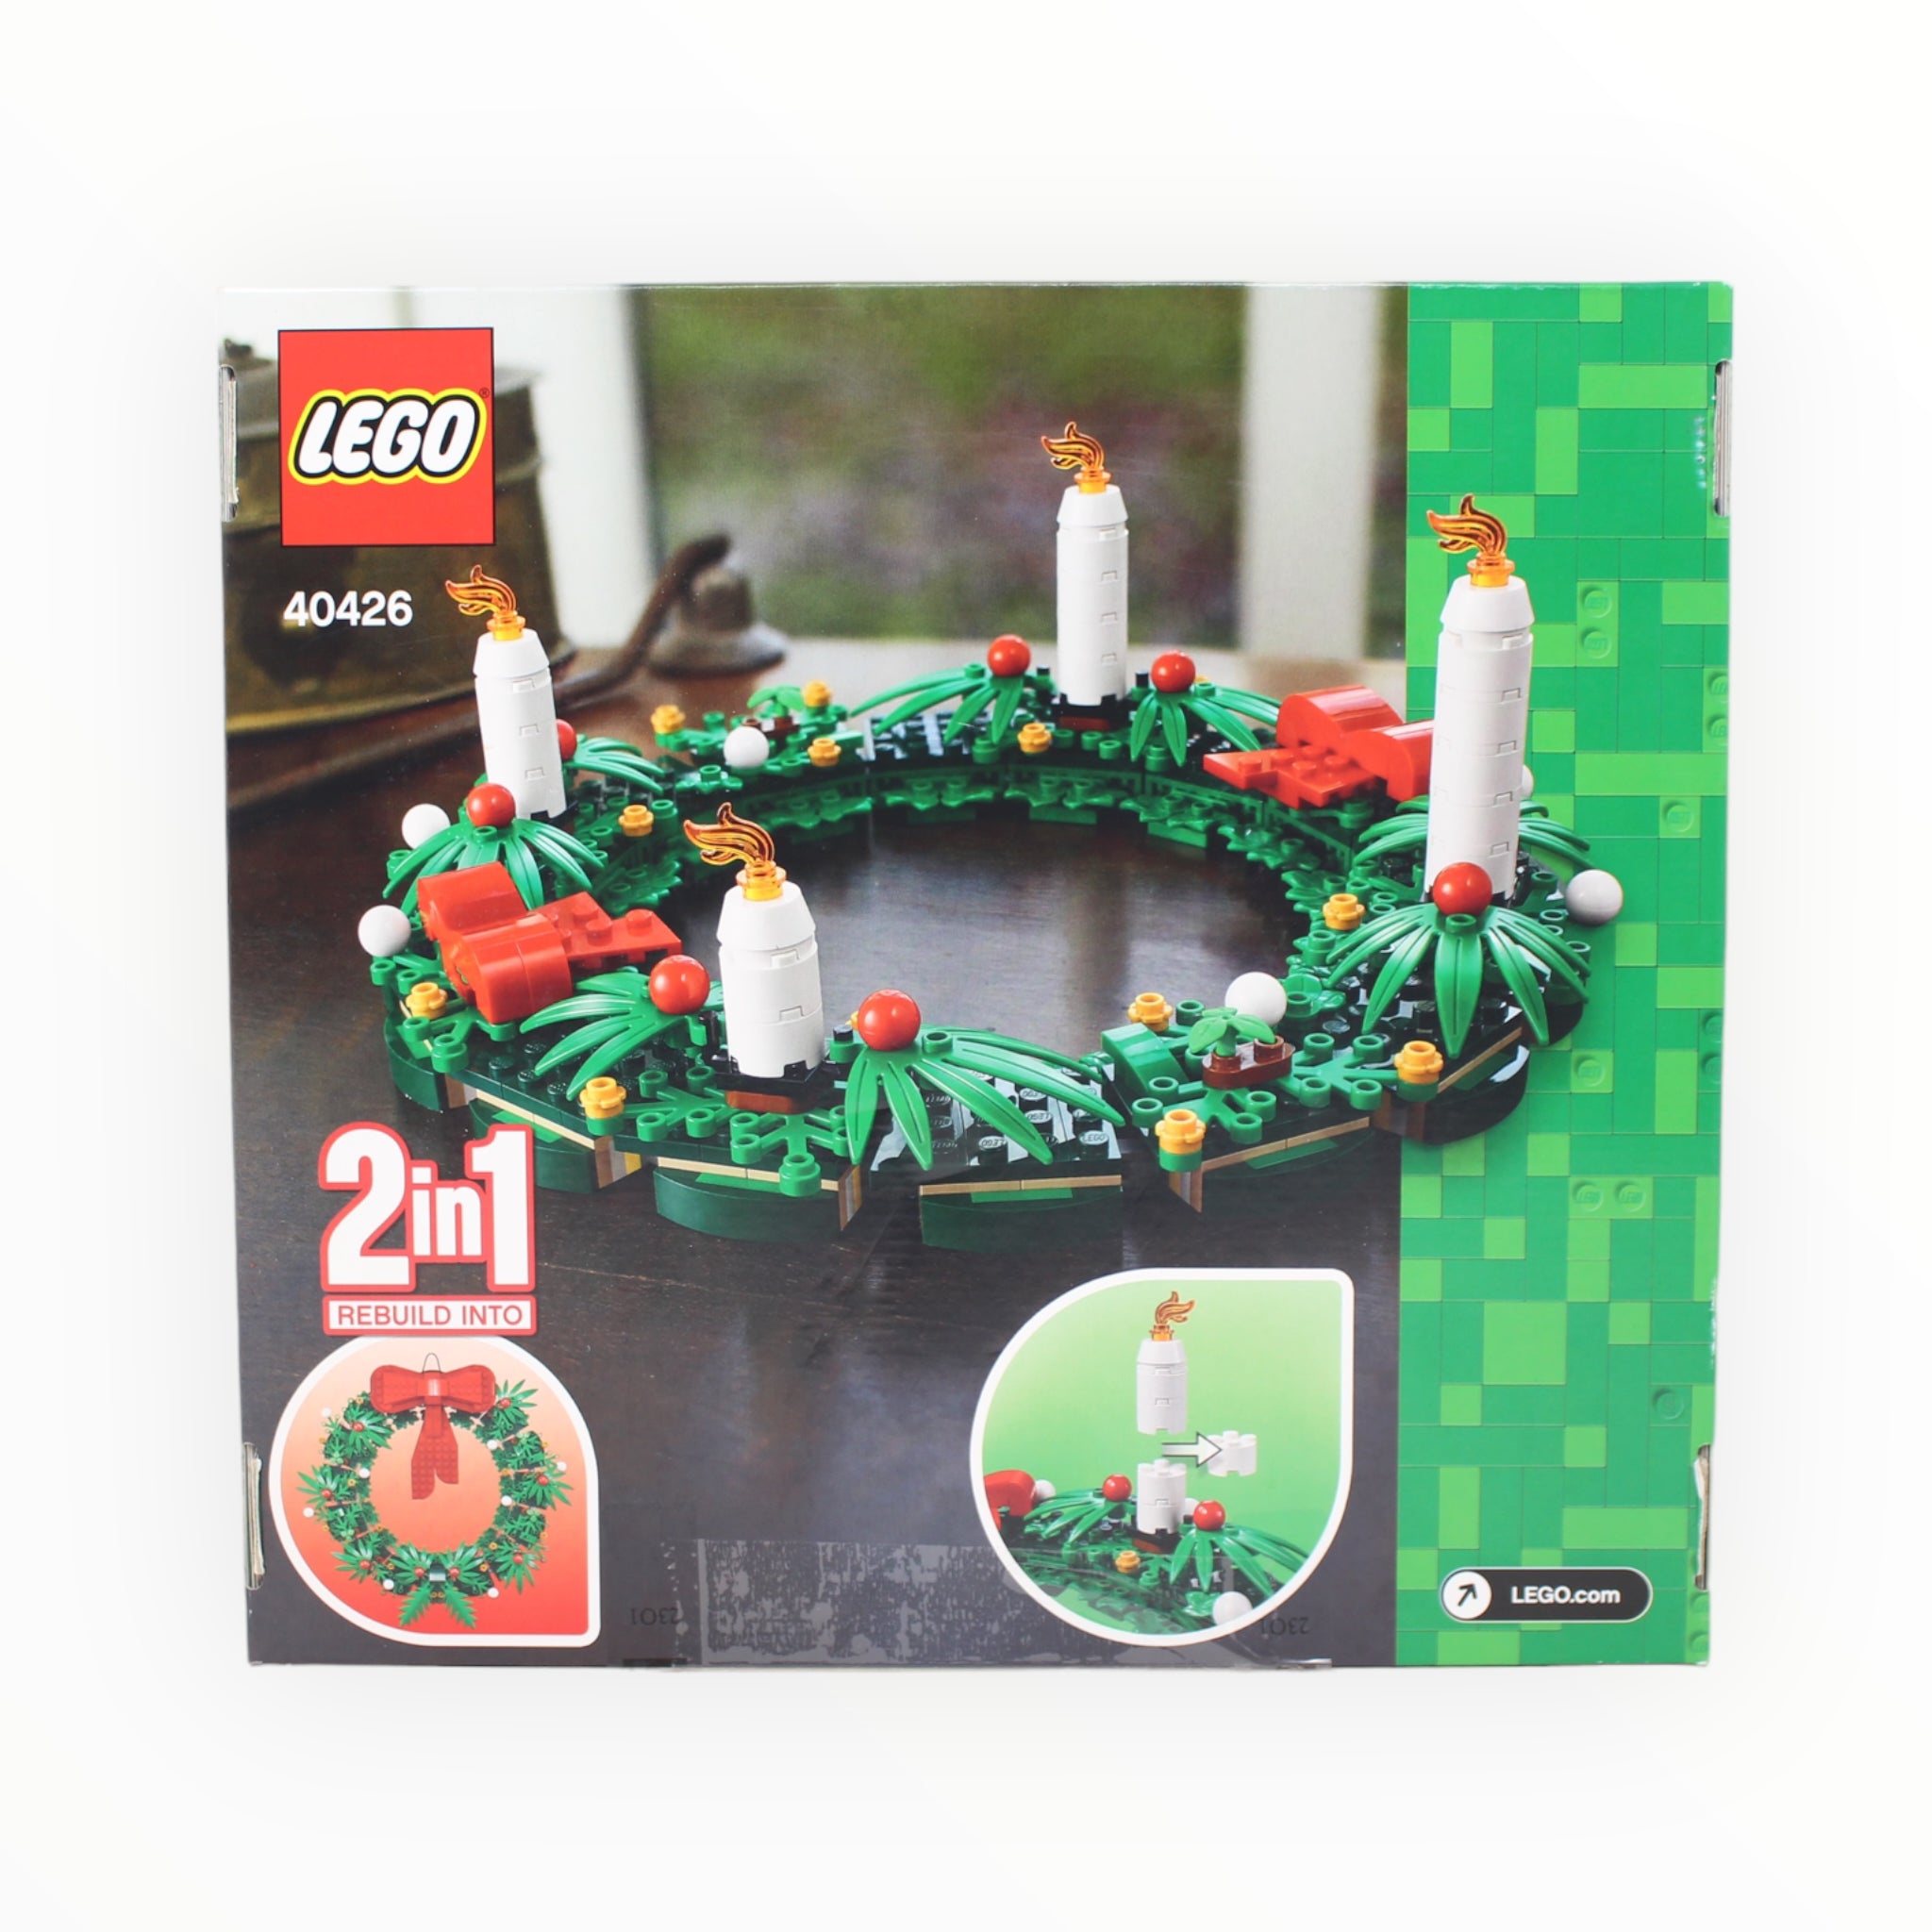 Certified Used Set 40426 LEGO Christmas Wreath 2-in-1